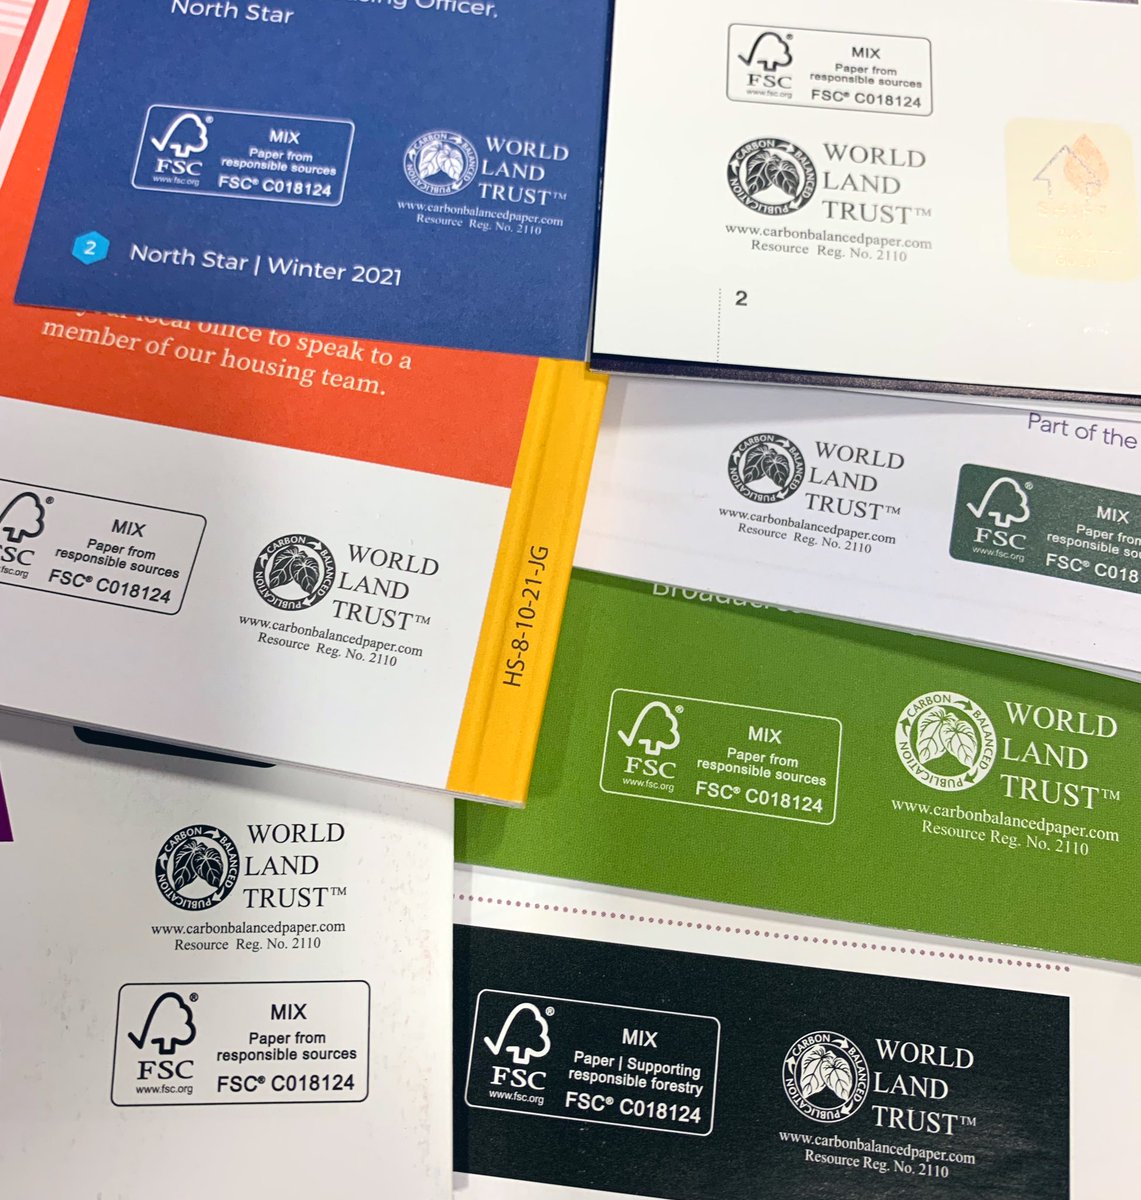 🔥 Hot Off The Press 🔥 

Just a few of the customer magazines produced over winter and January and all taking advantage of the @FSCUK and @worldlandtrust logos to showcase sustainably sourced print! 

Striving to be greener through communications with #TheGreenerRoom! 🌍